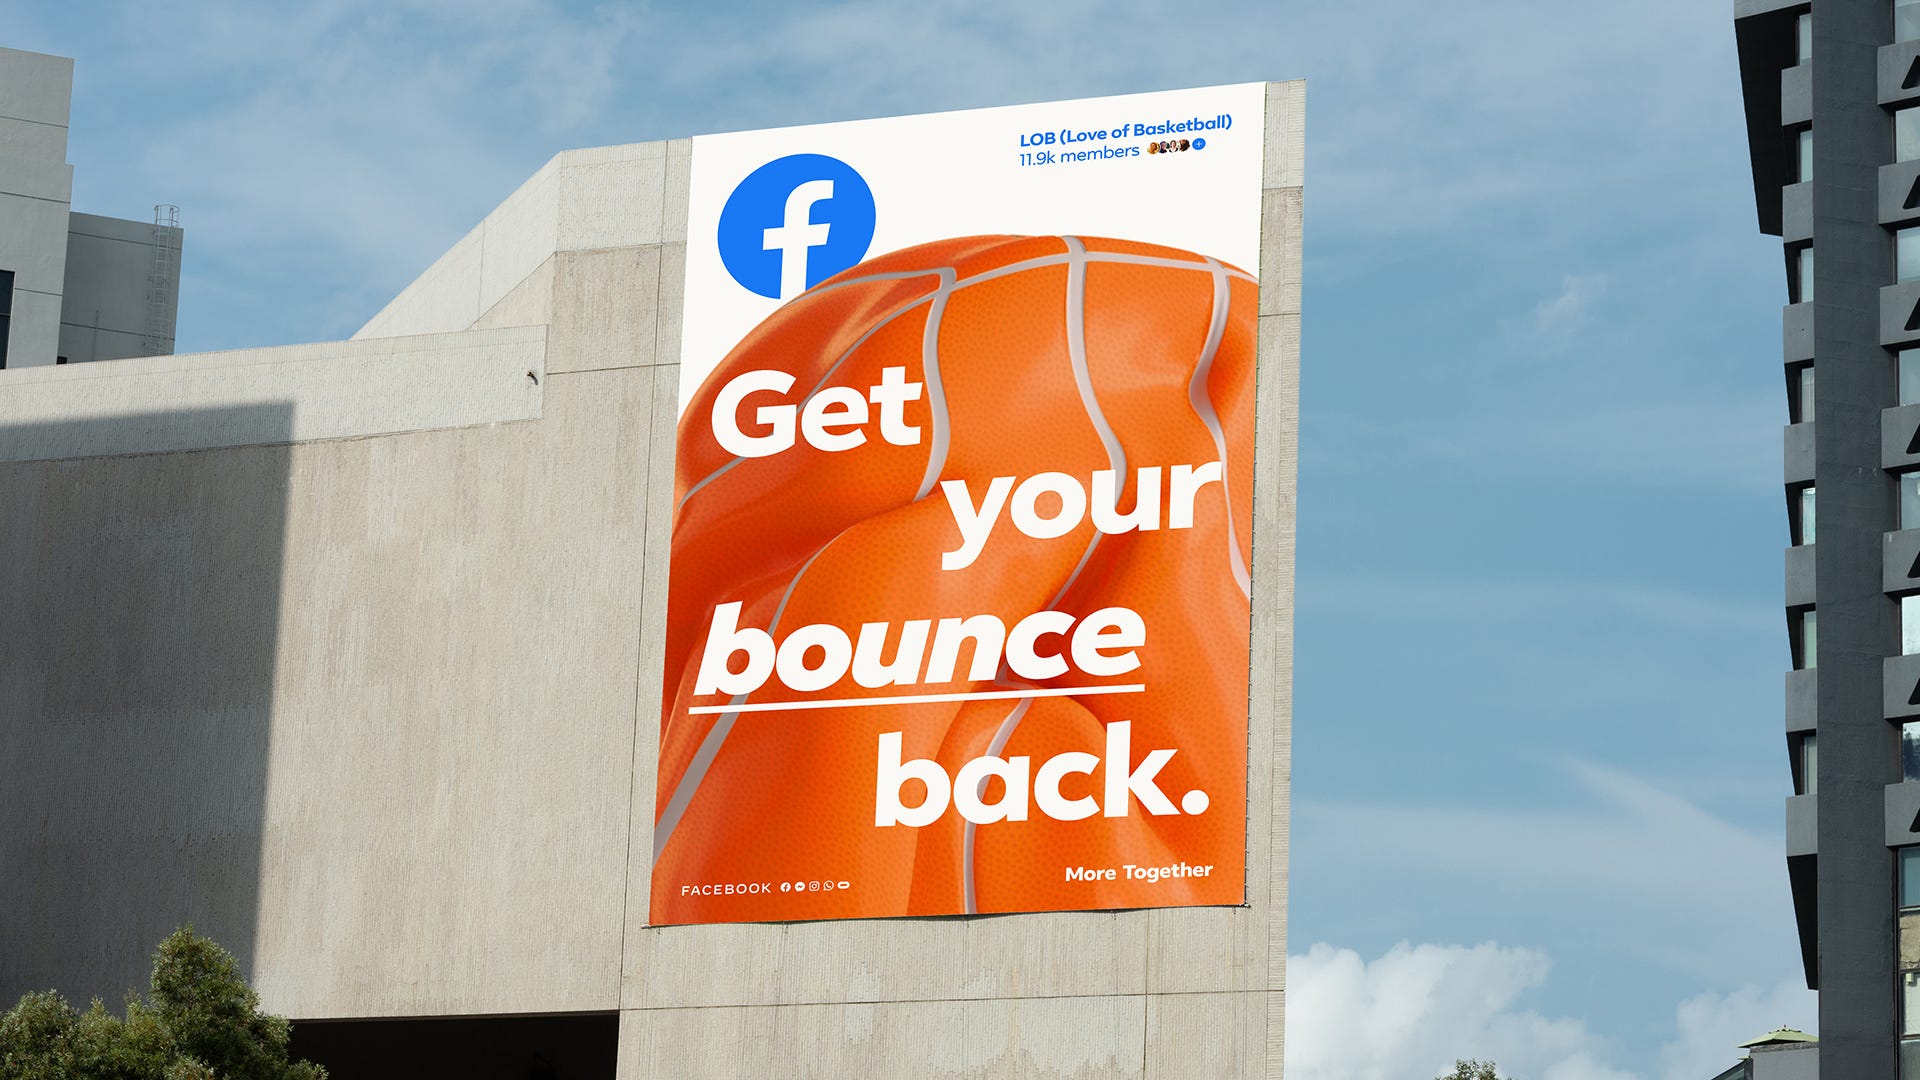 A More Together advertisement on the side of a tall building says Get your bounce back.